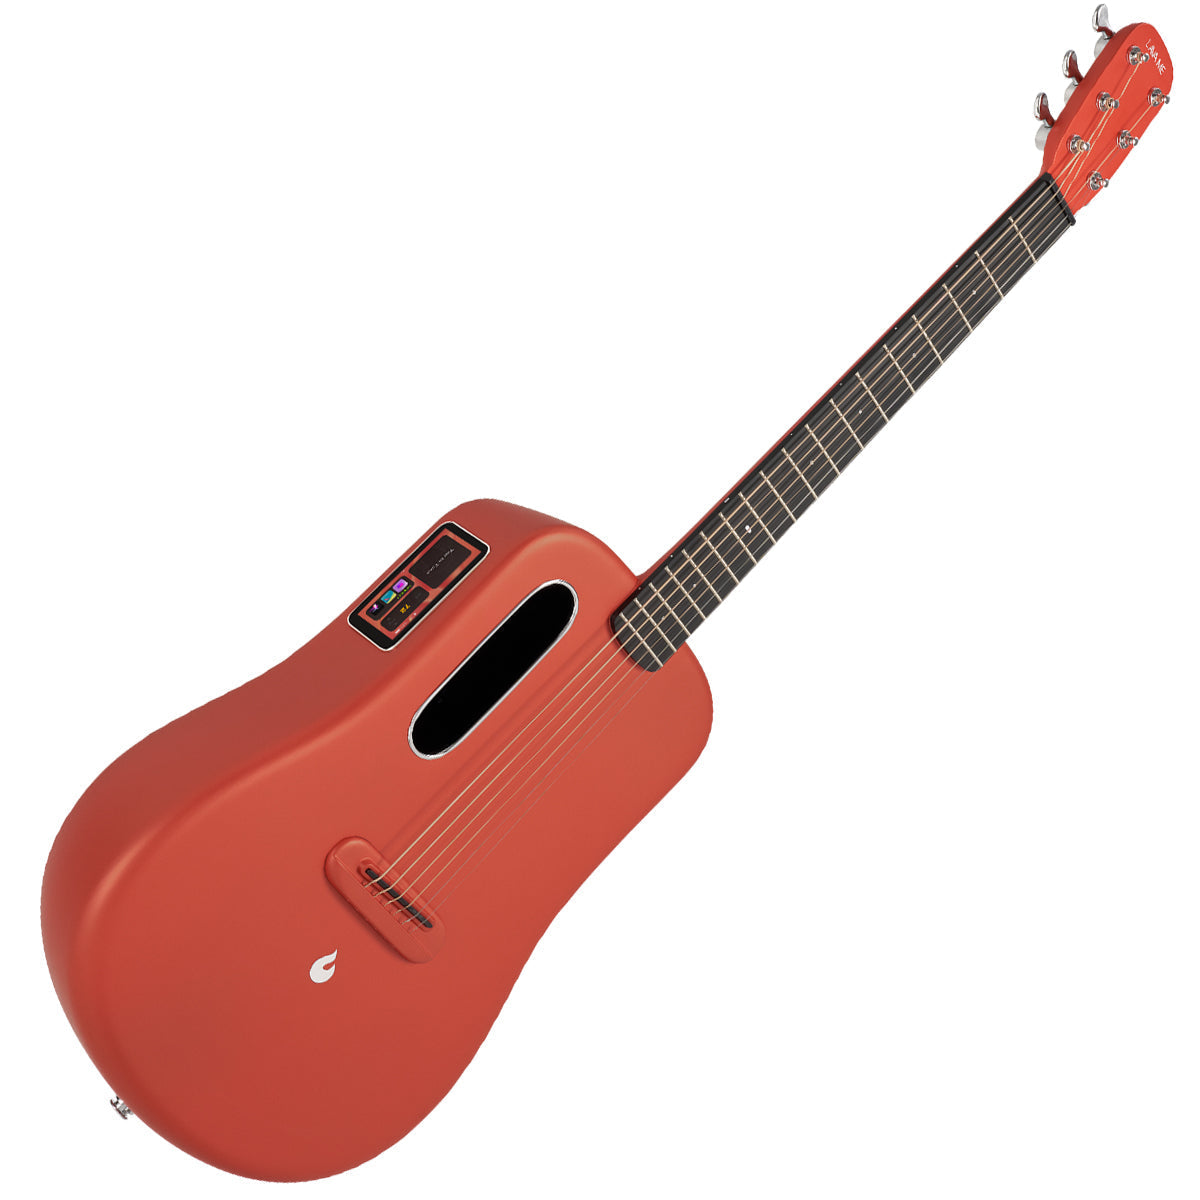 LAVA ME 3 38" with Space Bag ~ Red, Acoustic Guitar for sale at Richards Guitars.